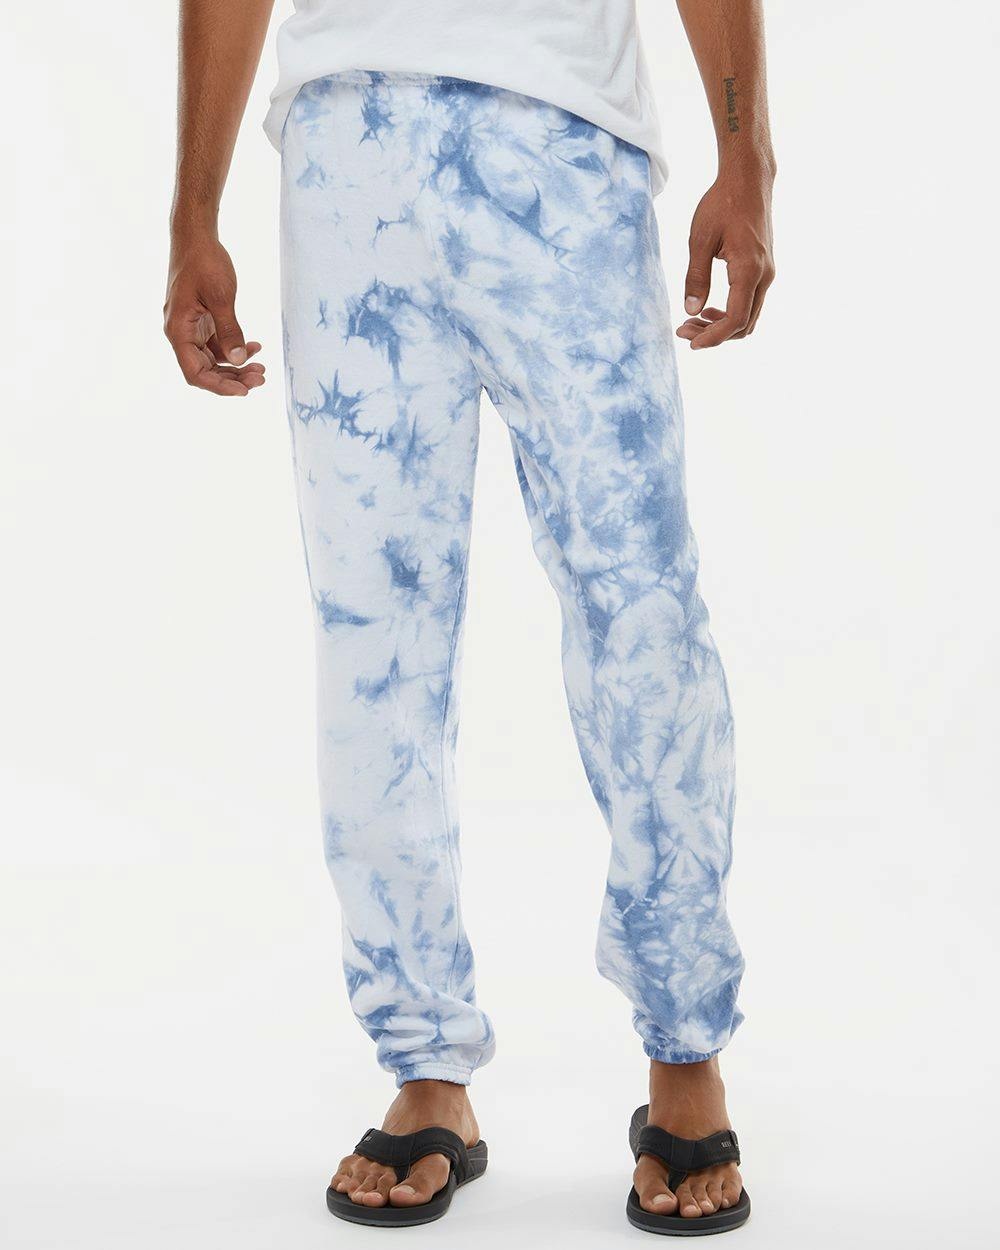 Image for Dream Tie-Dyed Sweatpants - 973VR